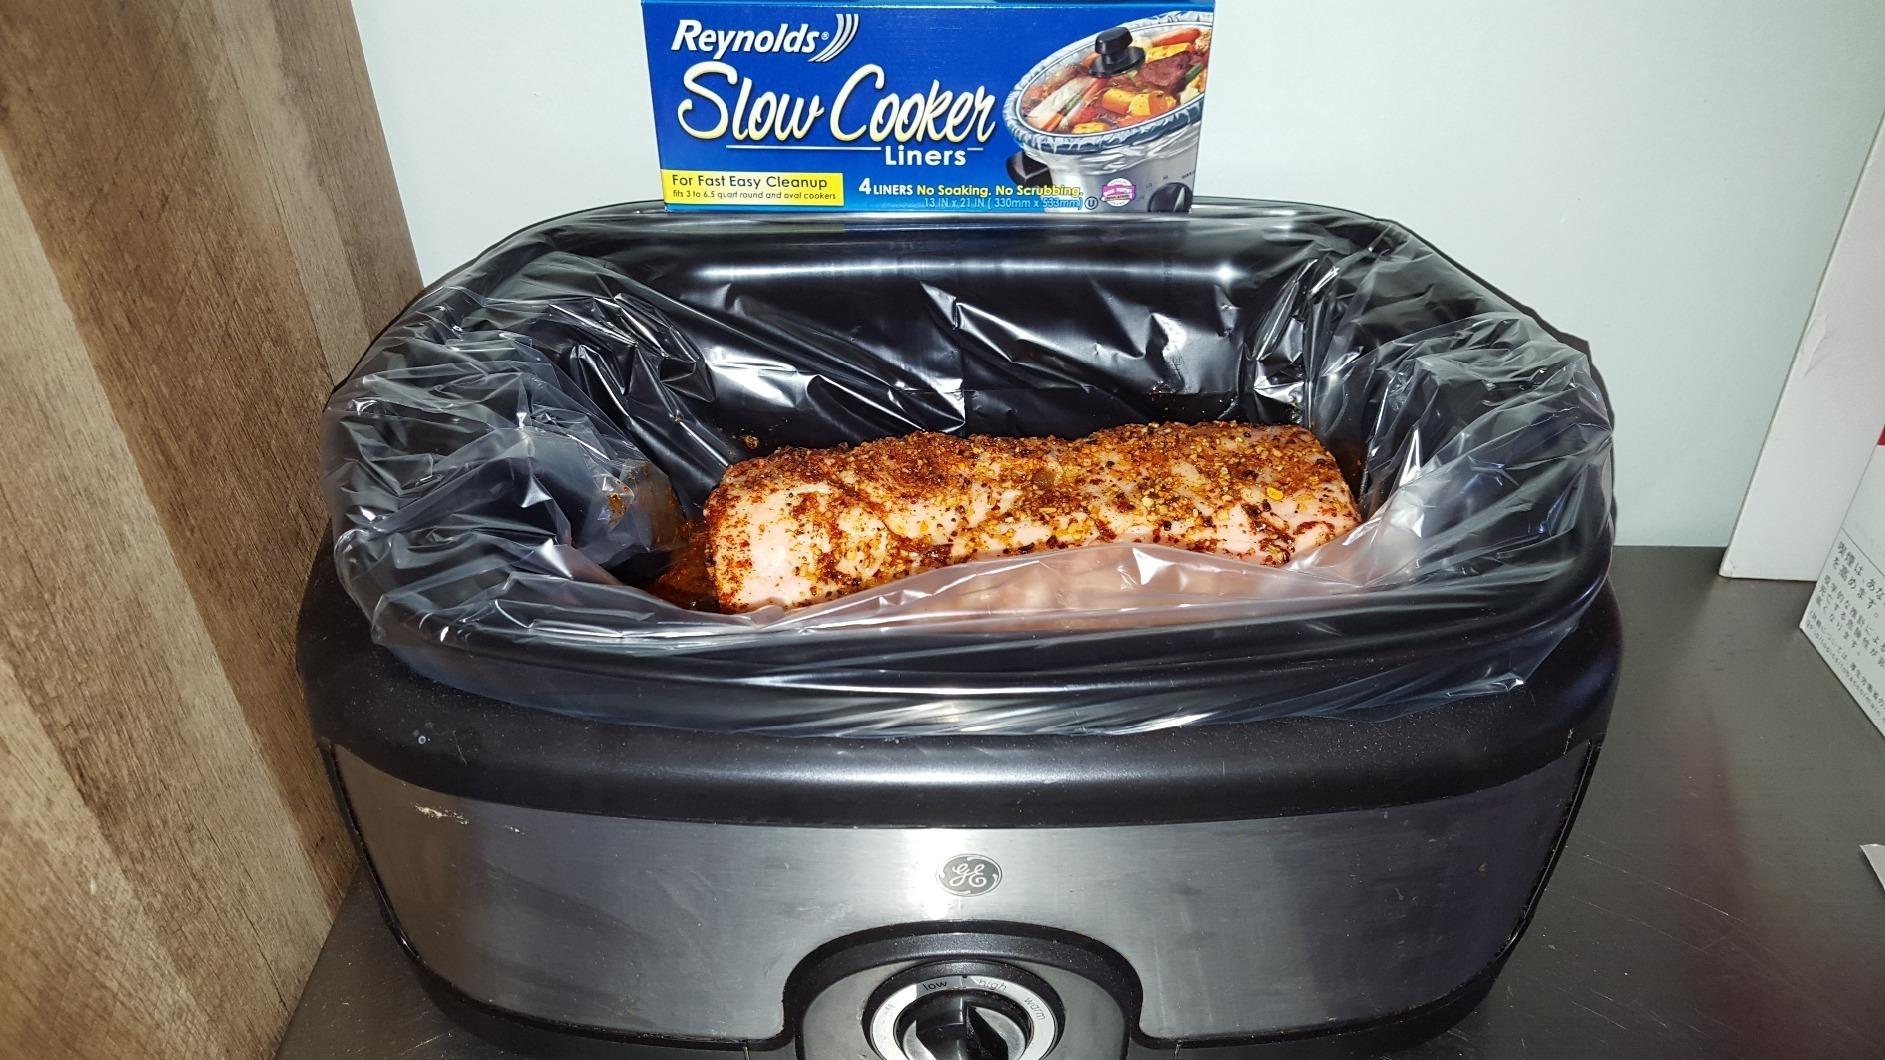 Reviewer image of the liner used in their slow cooker